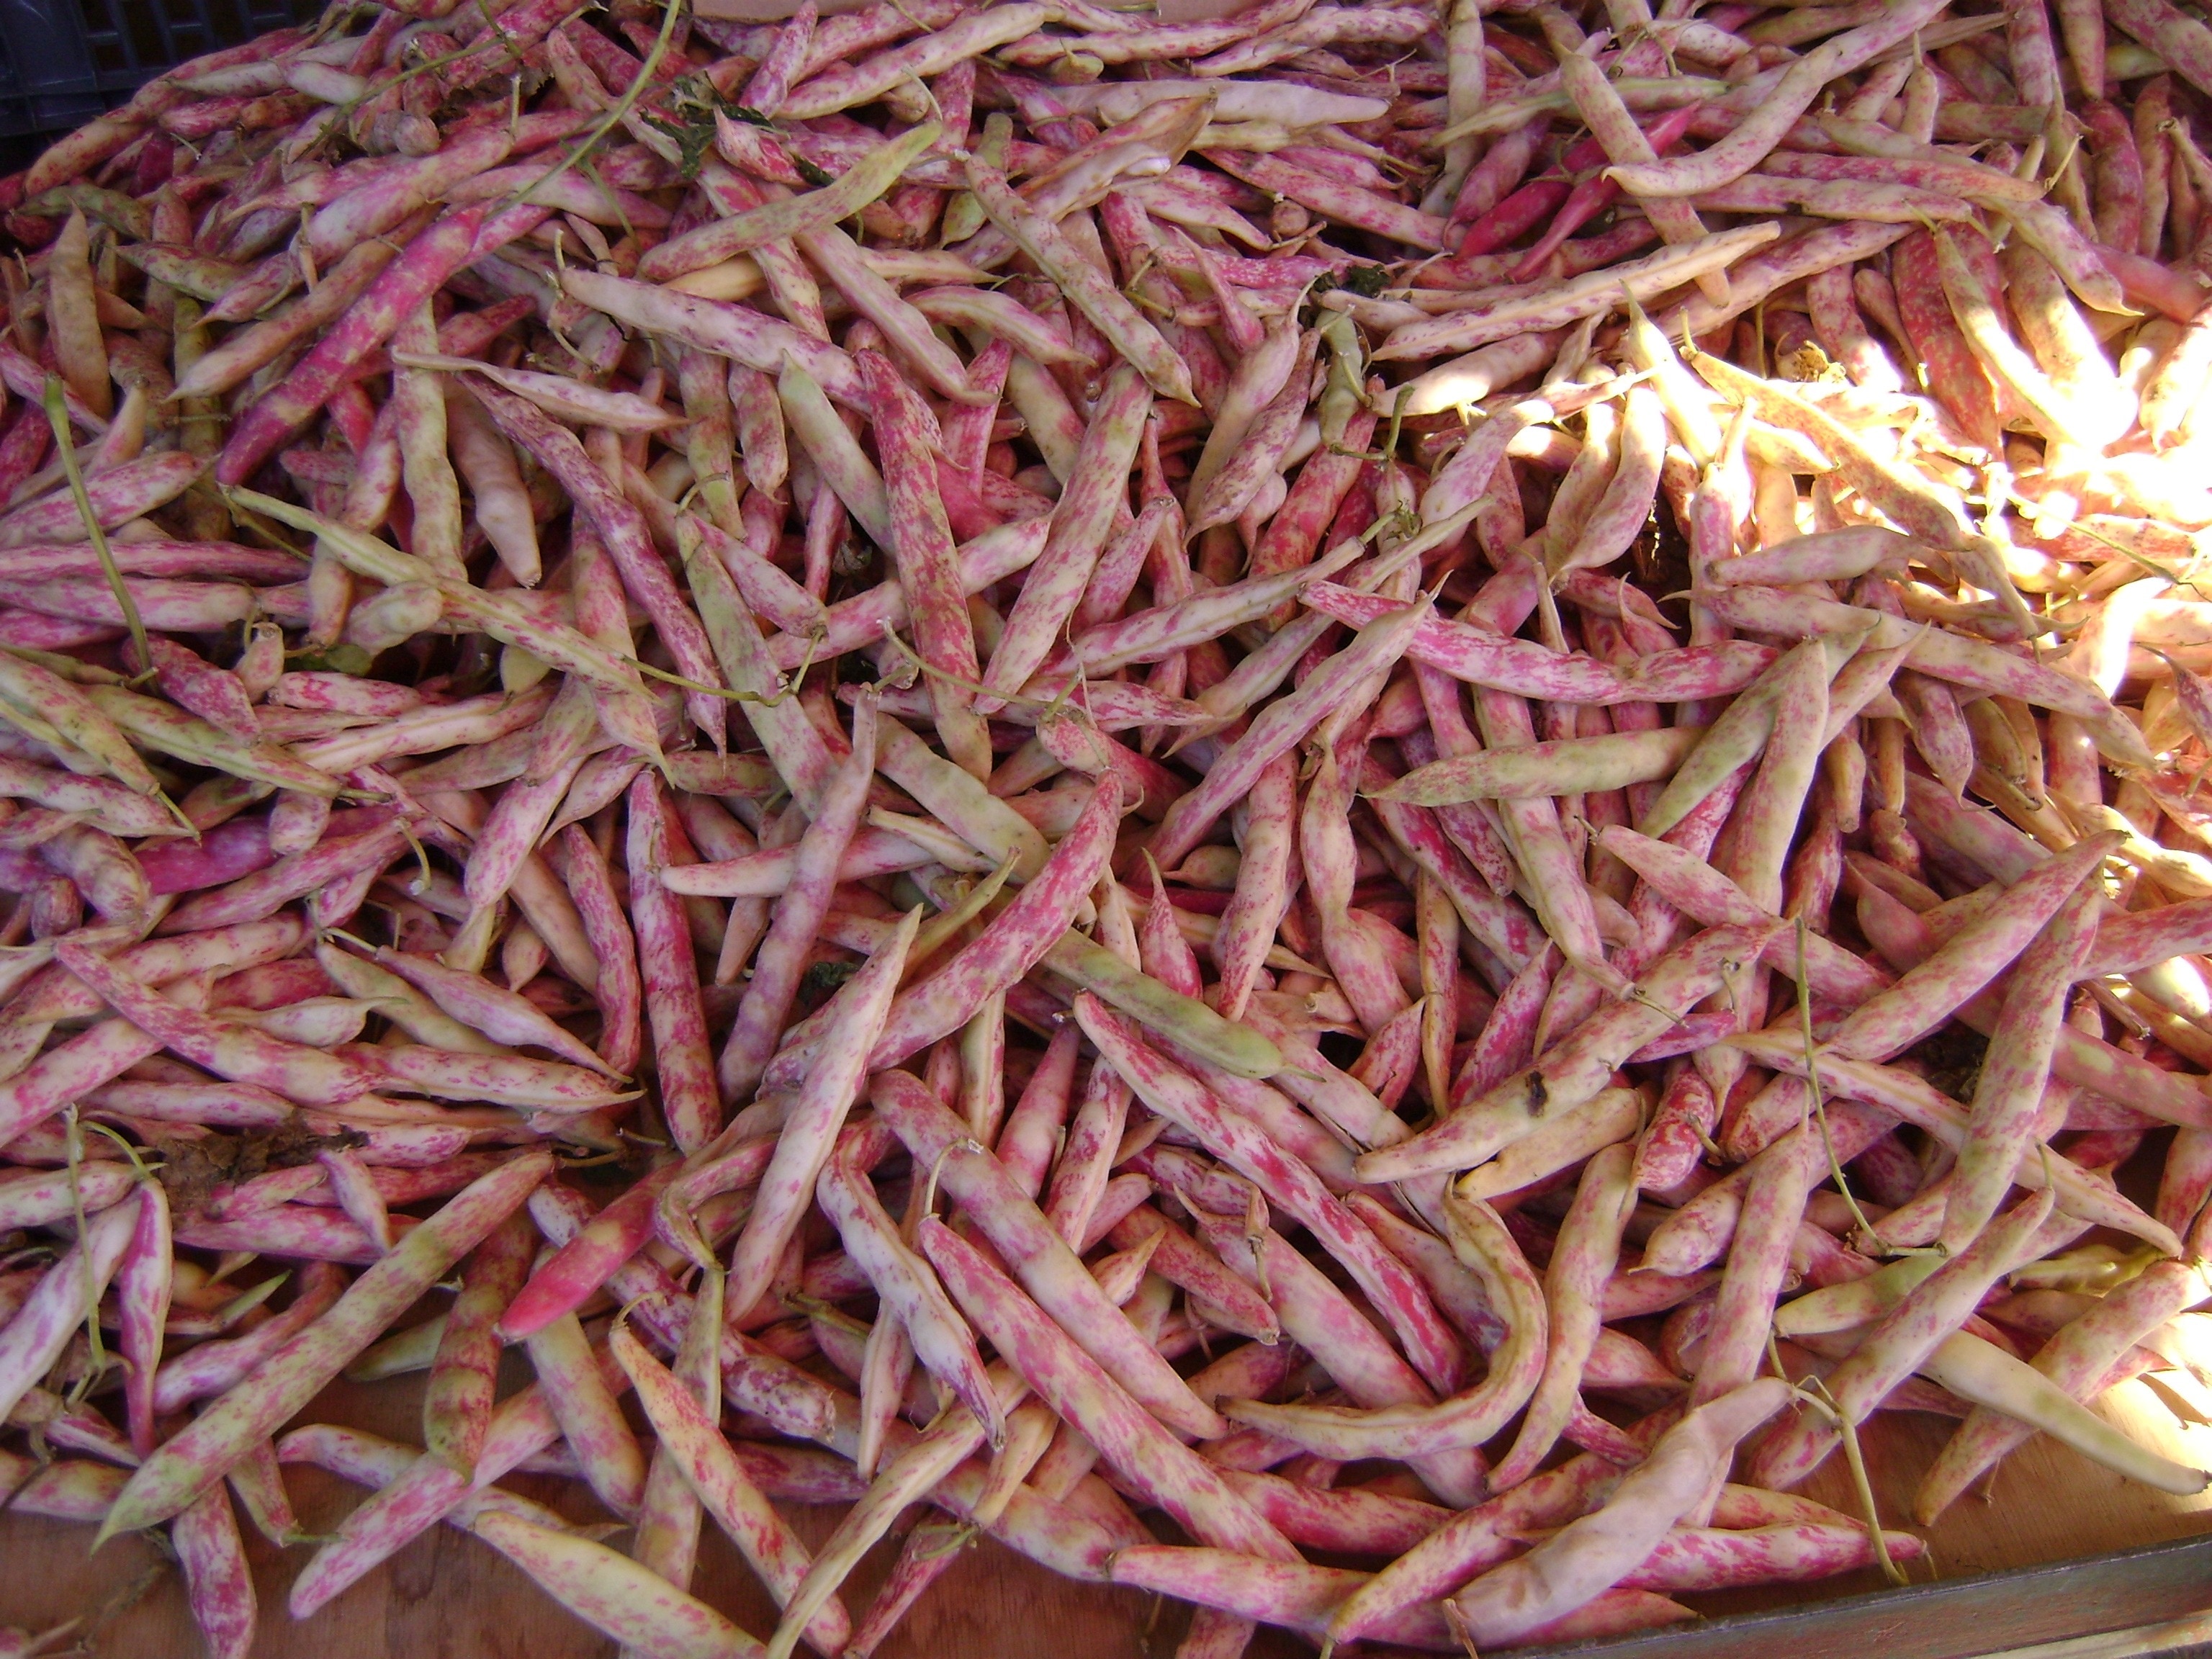 pink and brown vegetable lot